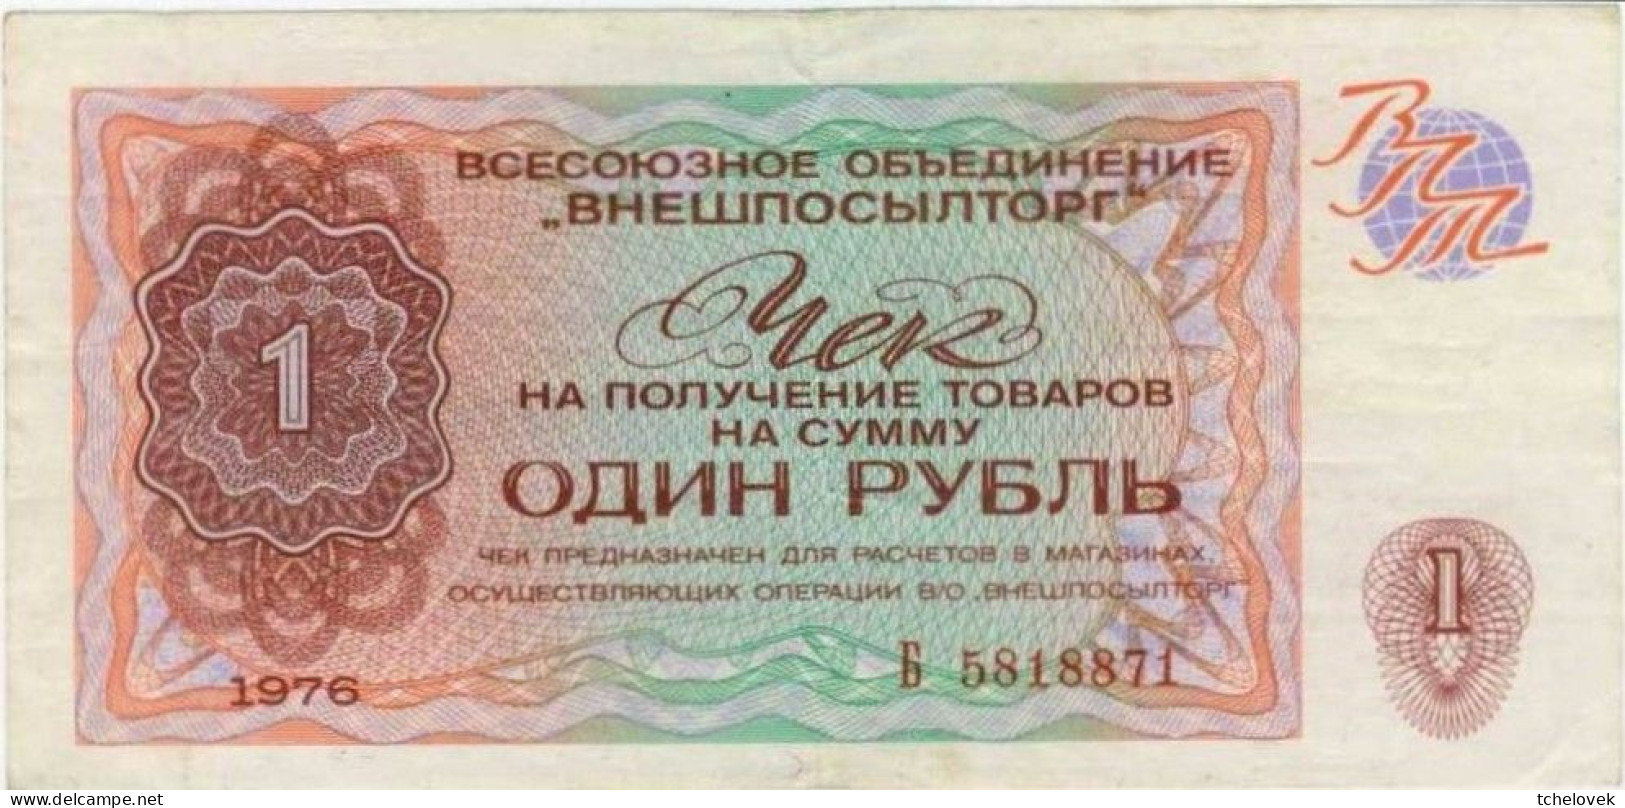 (Billets). Russie Russia URSS USSR Vneshposiltorg 1 Rouble 1976 N° B 5818871. Foreign Exchange Certificate Serie A - Russie